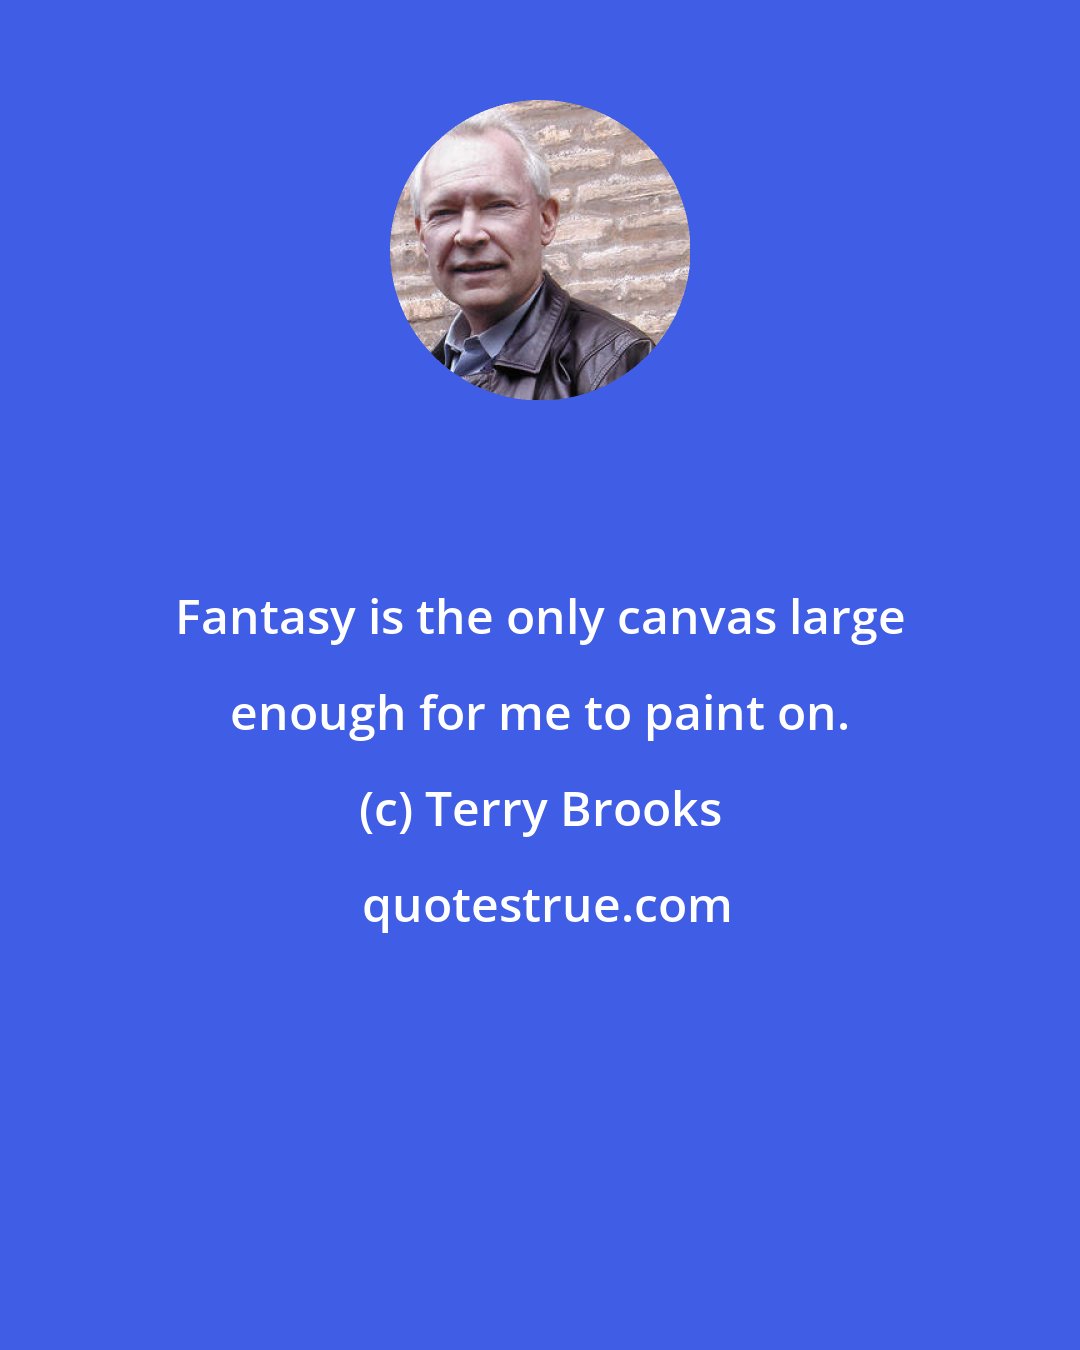 Terry Brooks: Fantasy is the only canvas large enough for me to paint on.